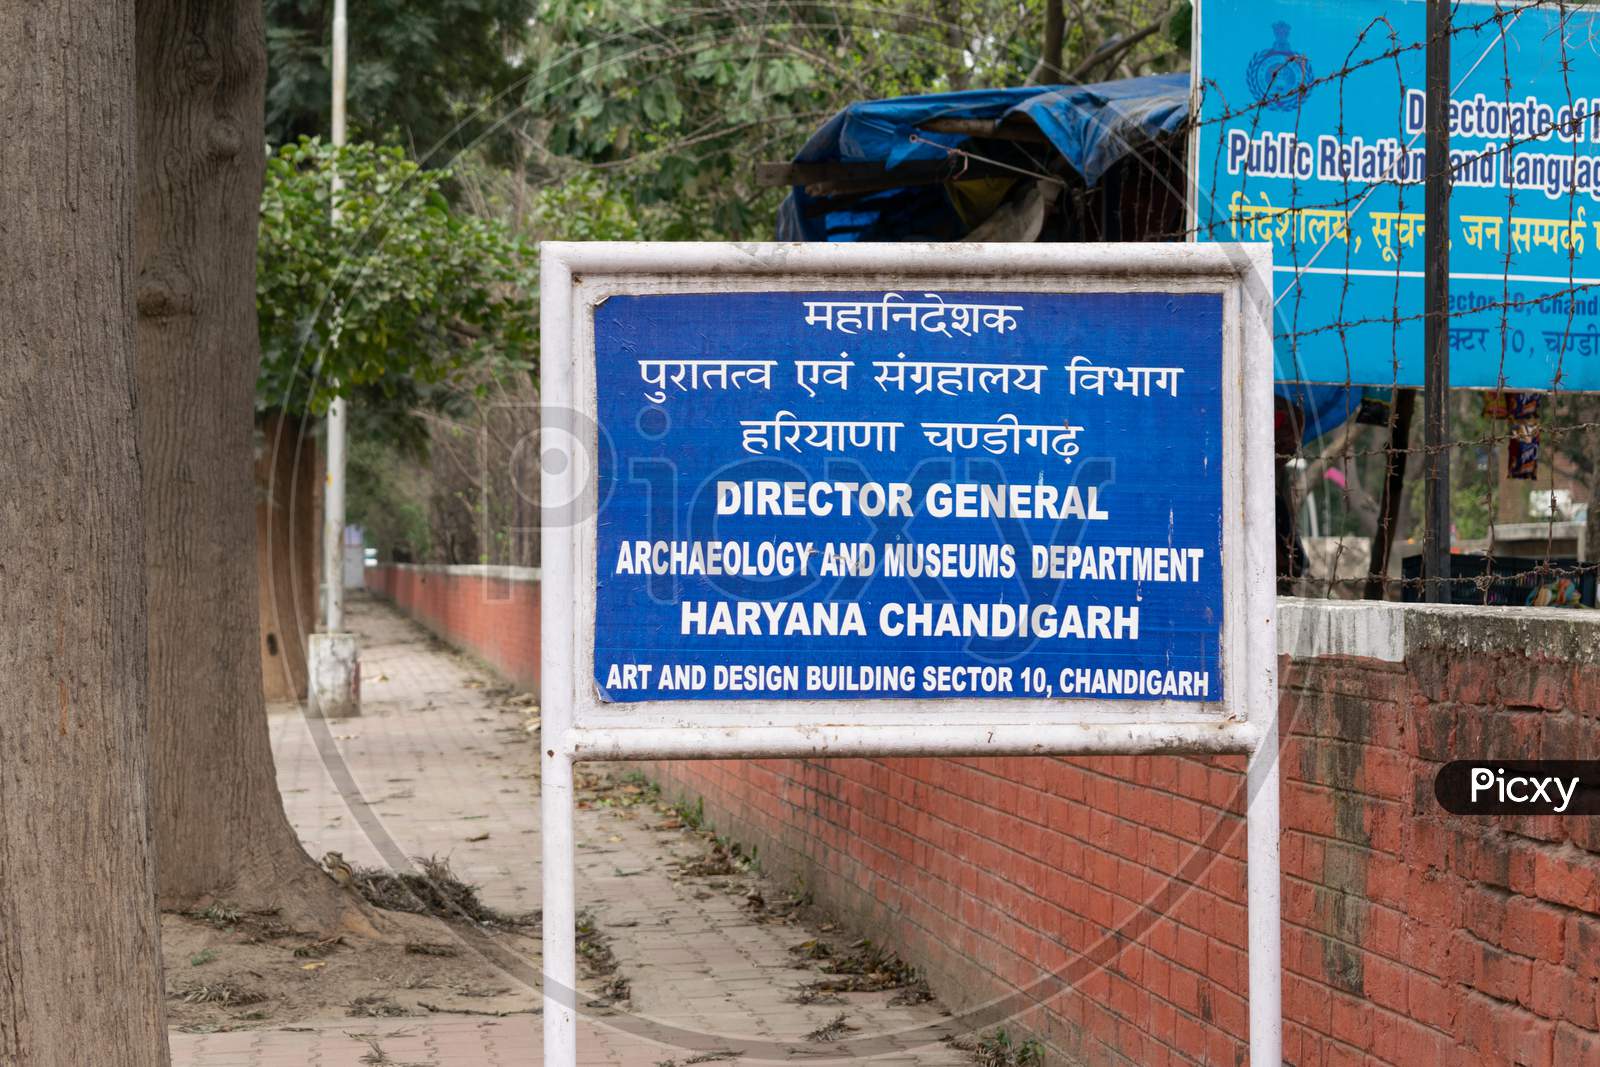 Director general archaeology and museums department haryana chandigarh